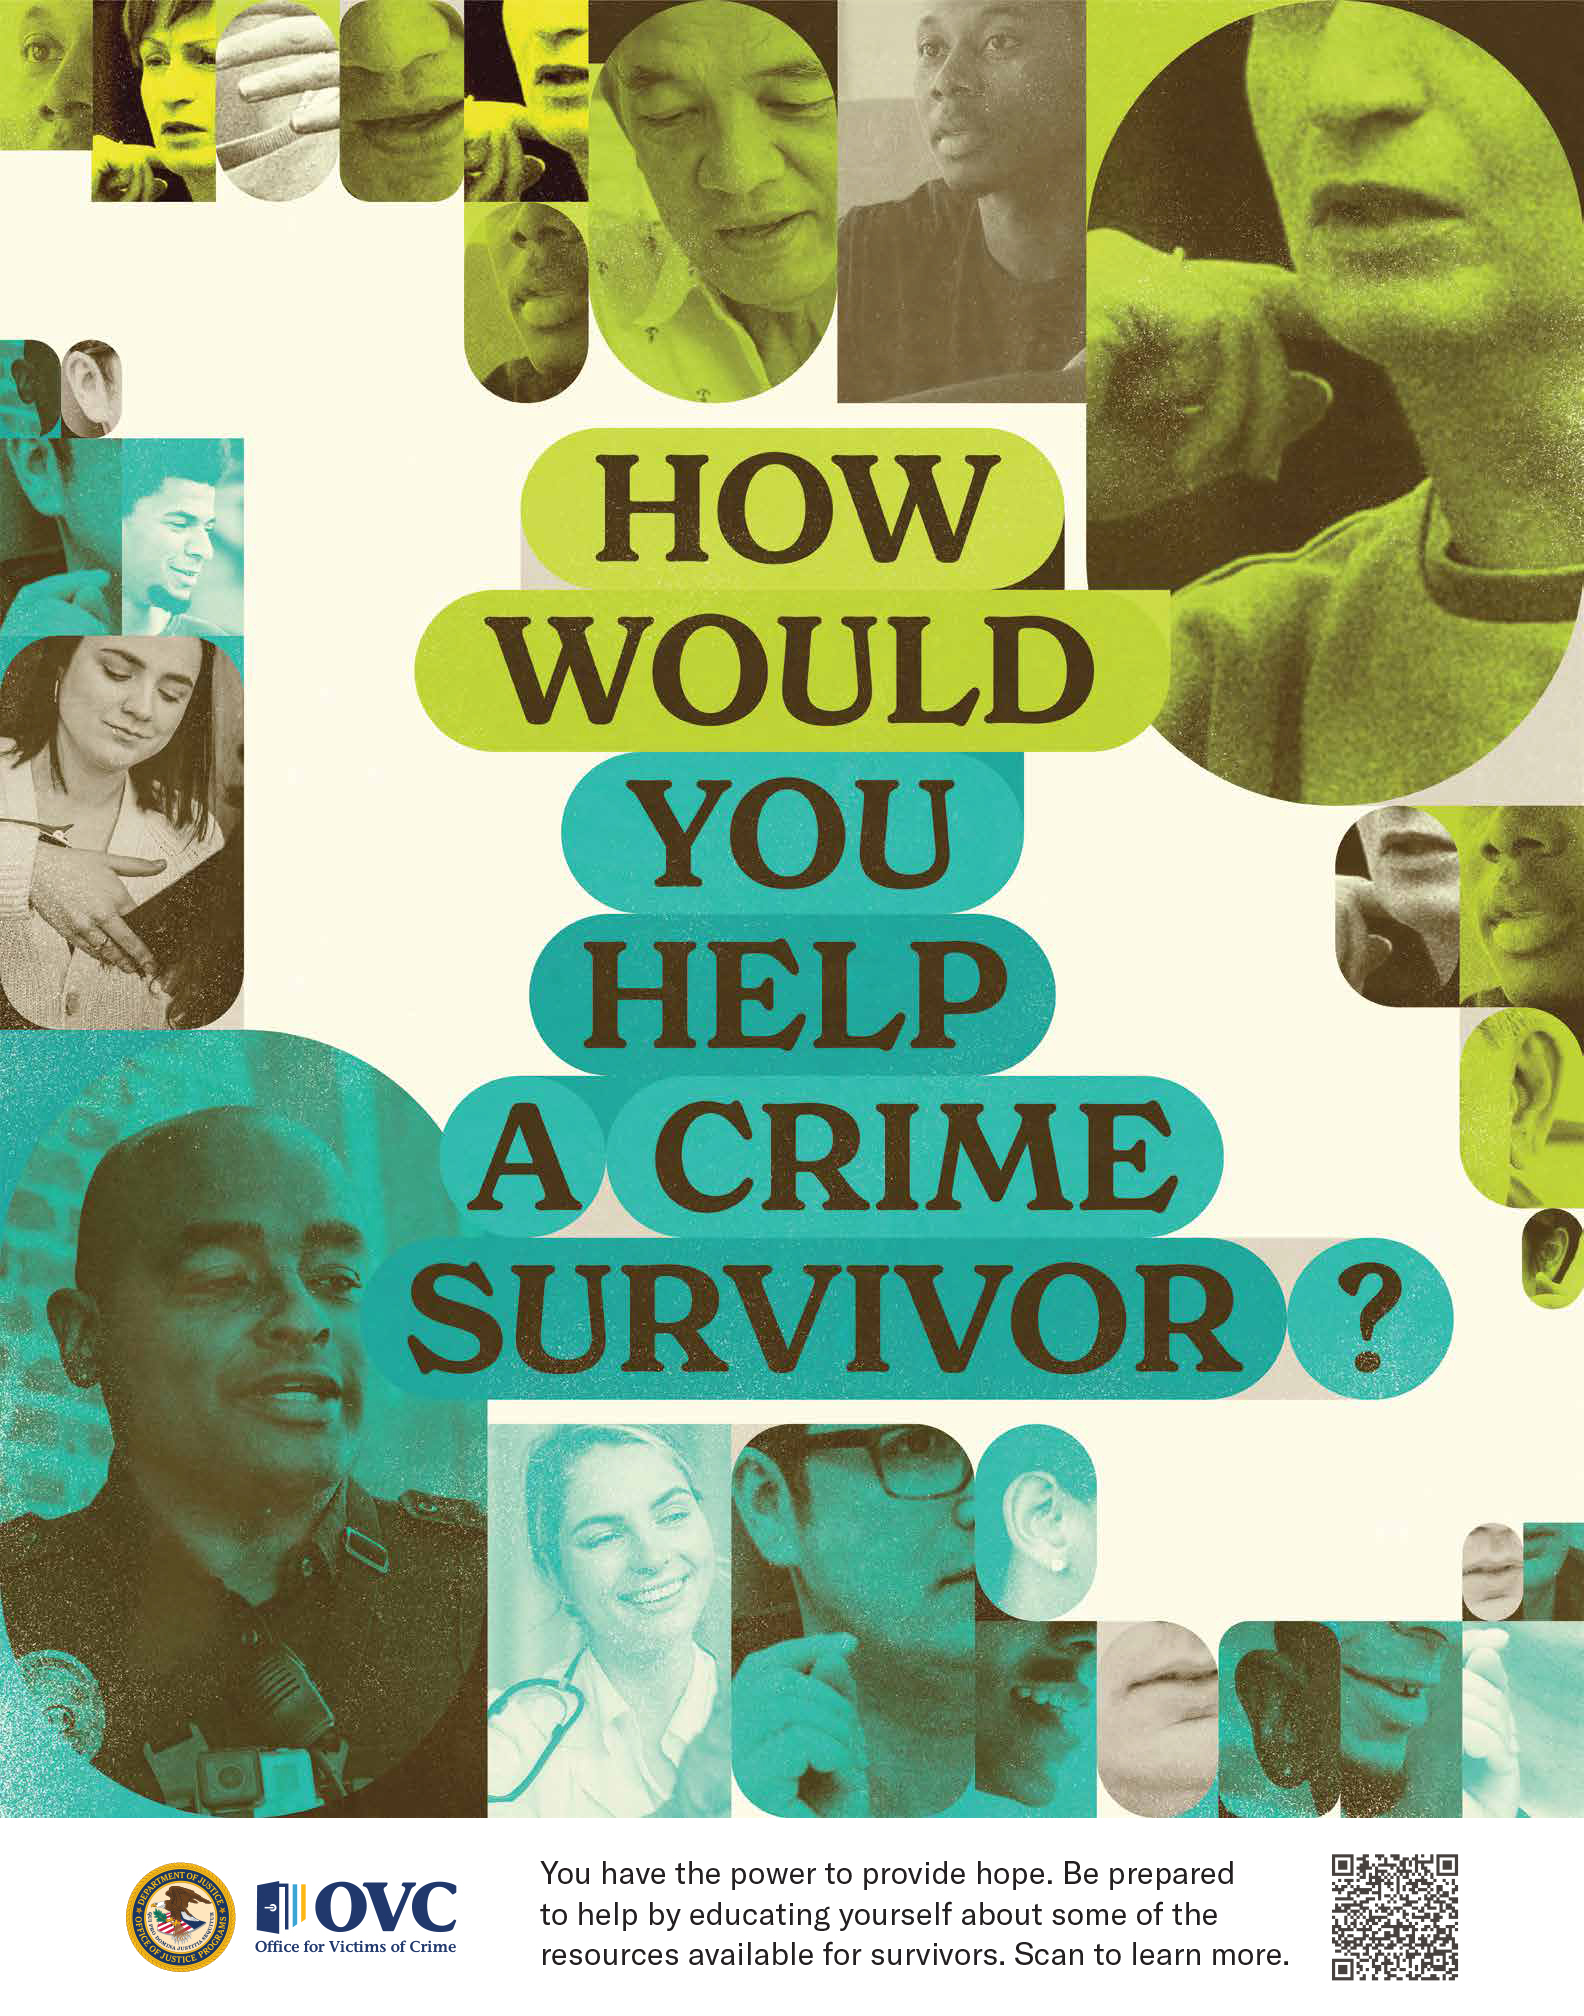 Campaign Poster for Office for Victims of Crime